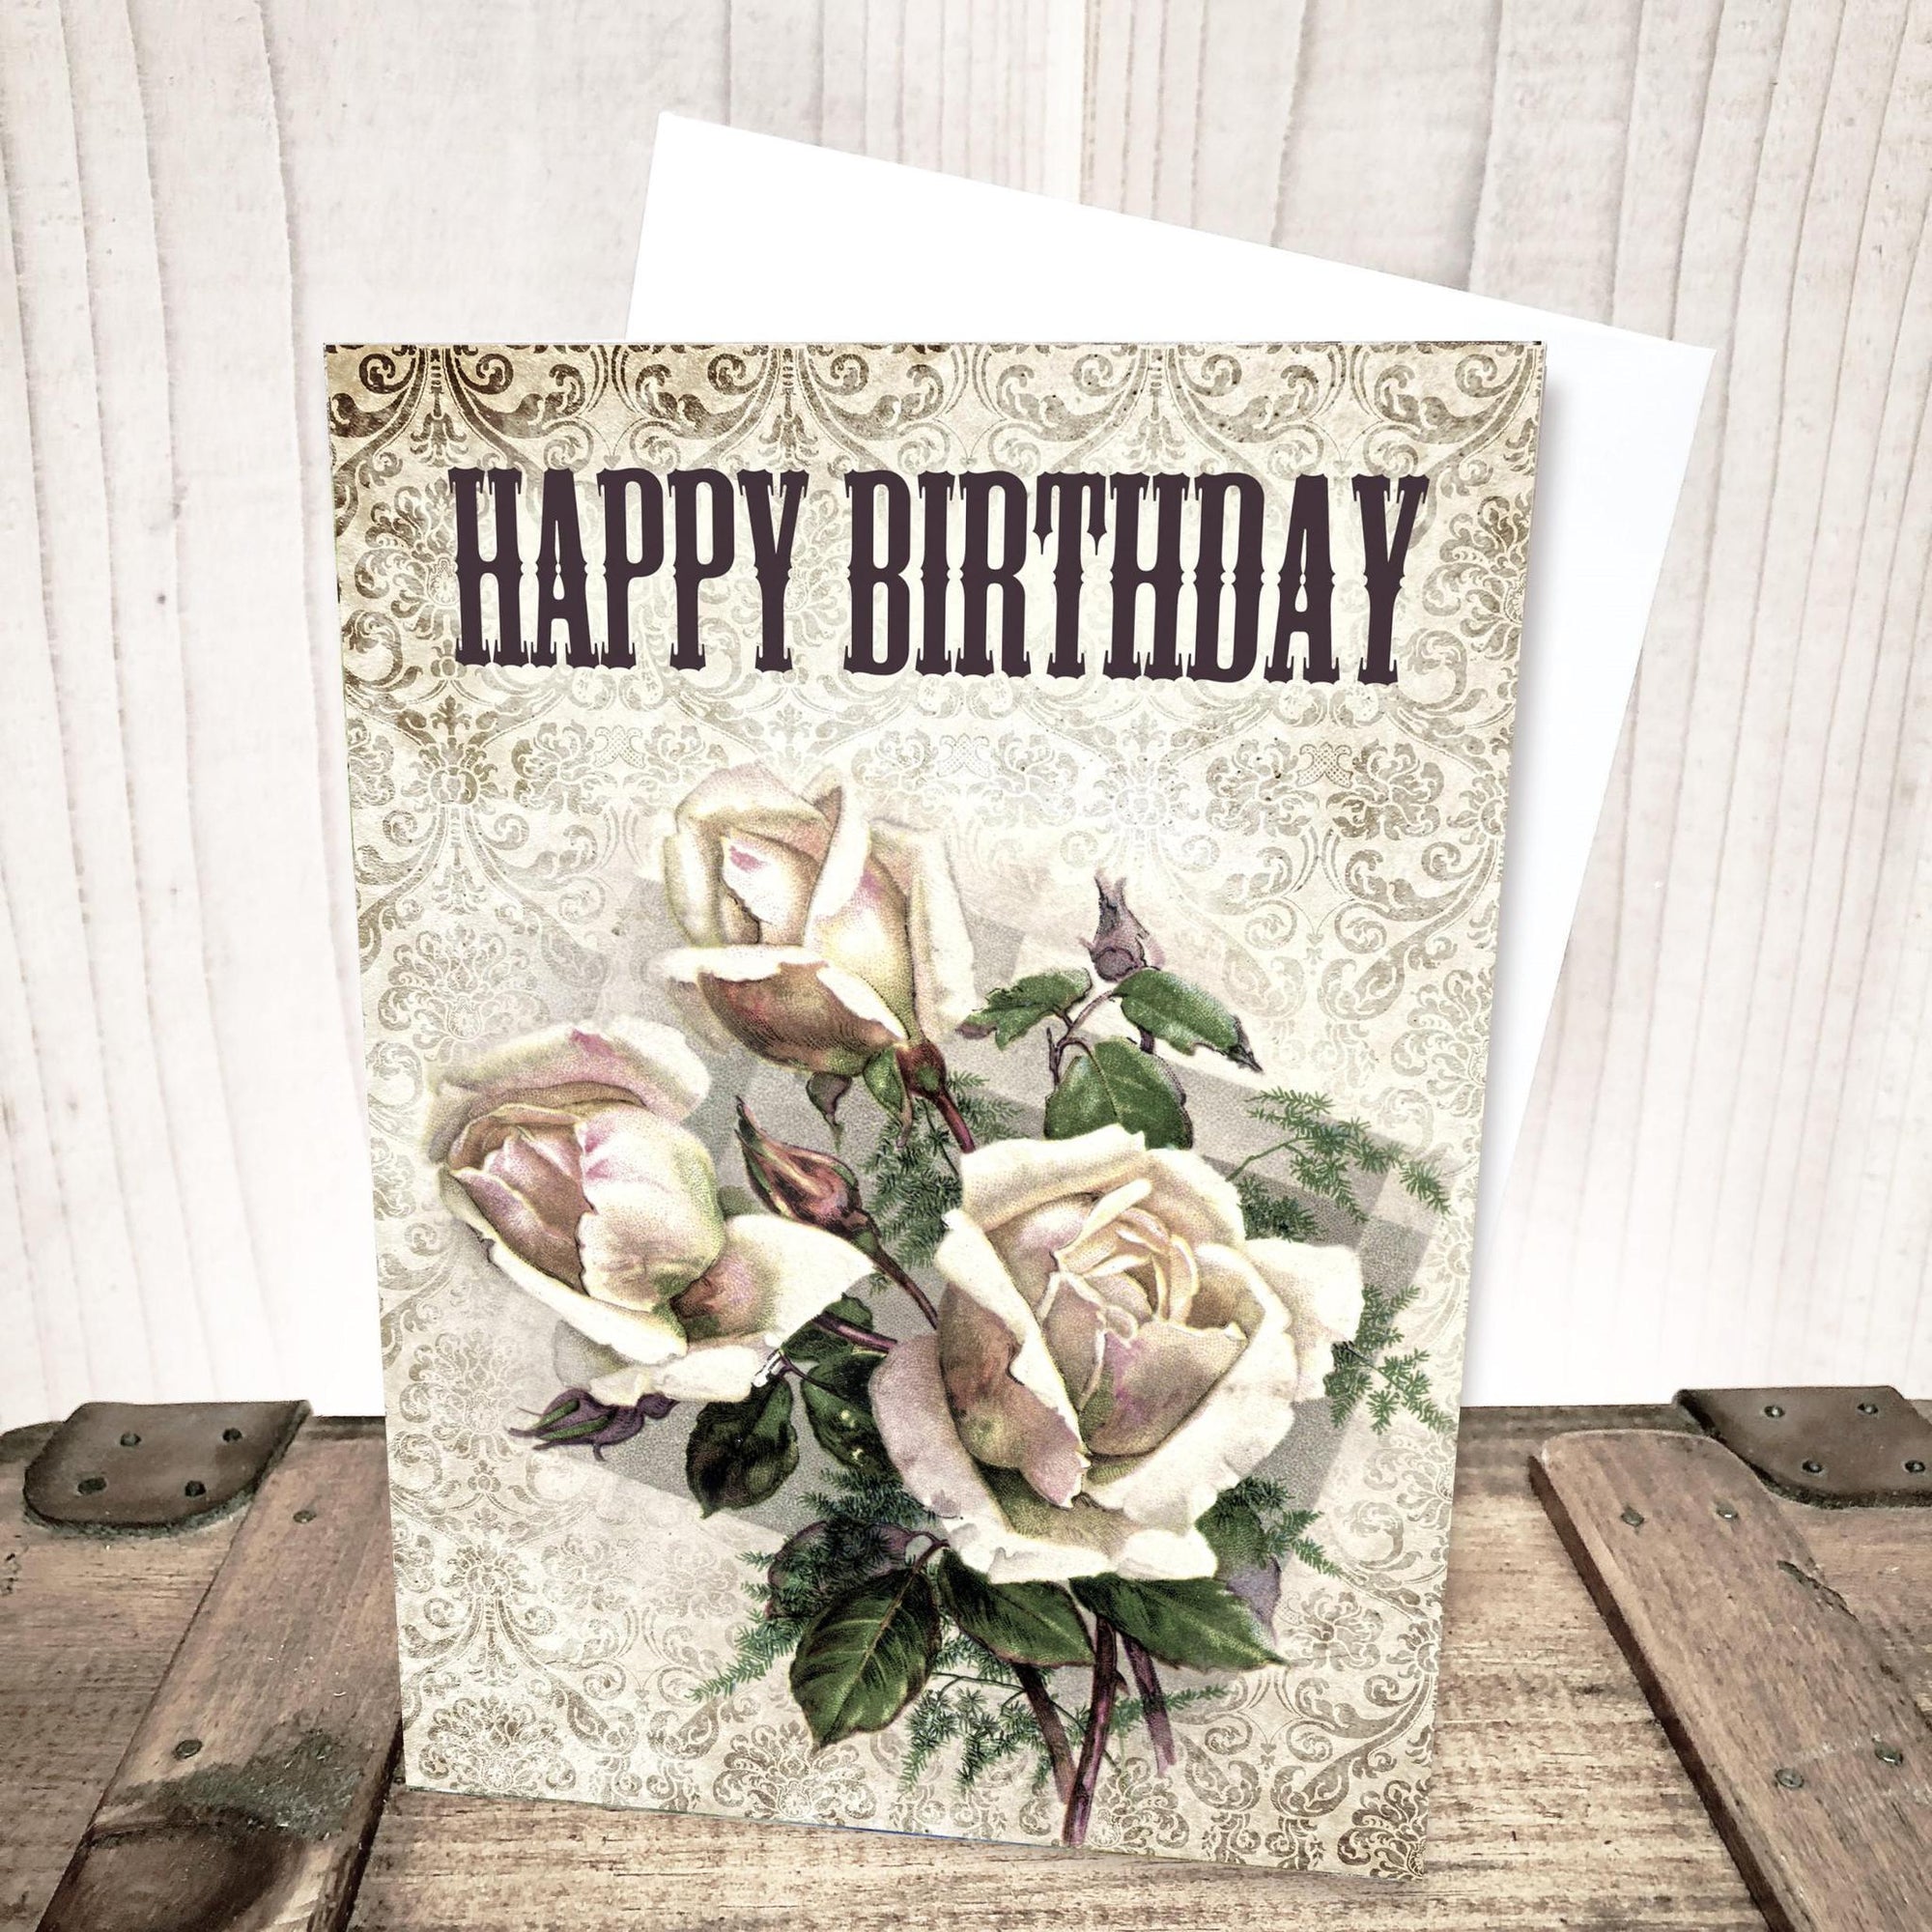 Vintage Roses Birthday Card by Yesterday's Best